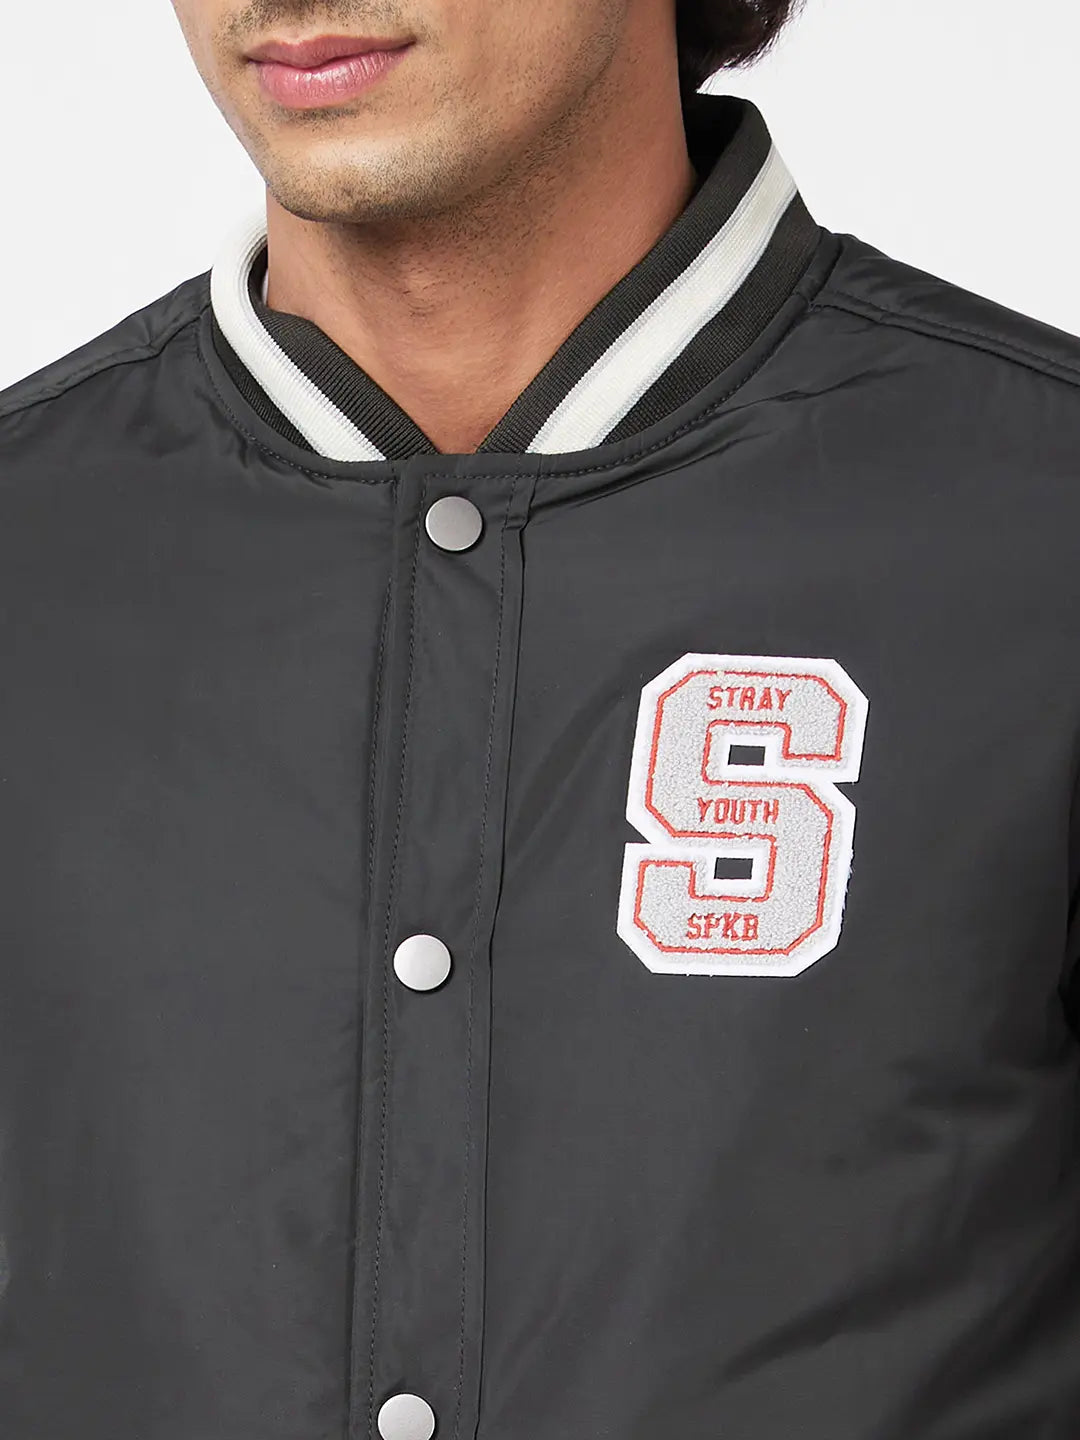 MEN'S VARSITY JACKET WITH TOWEL EMBROIDERY BADGES